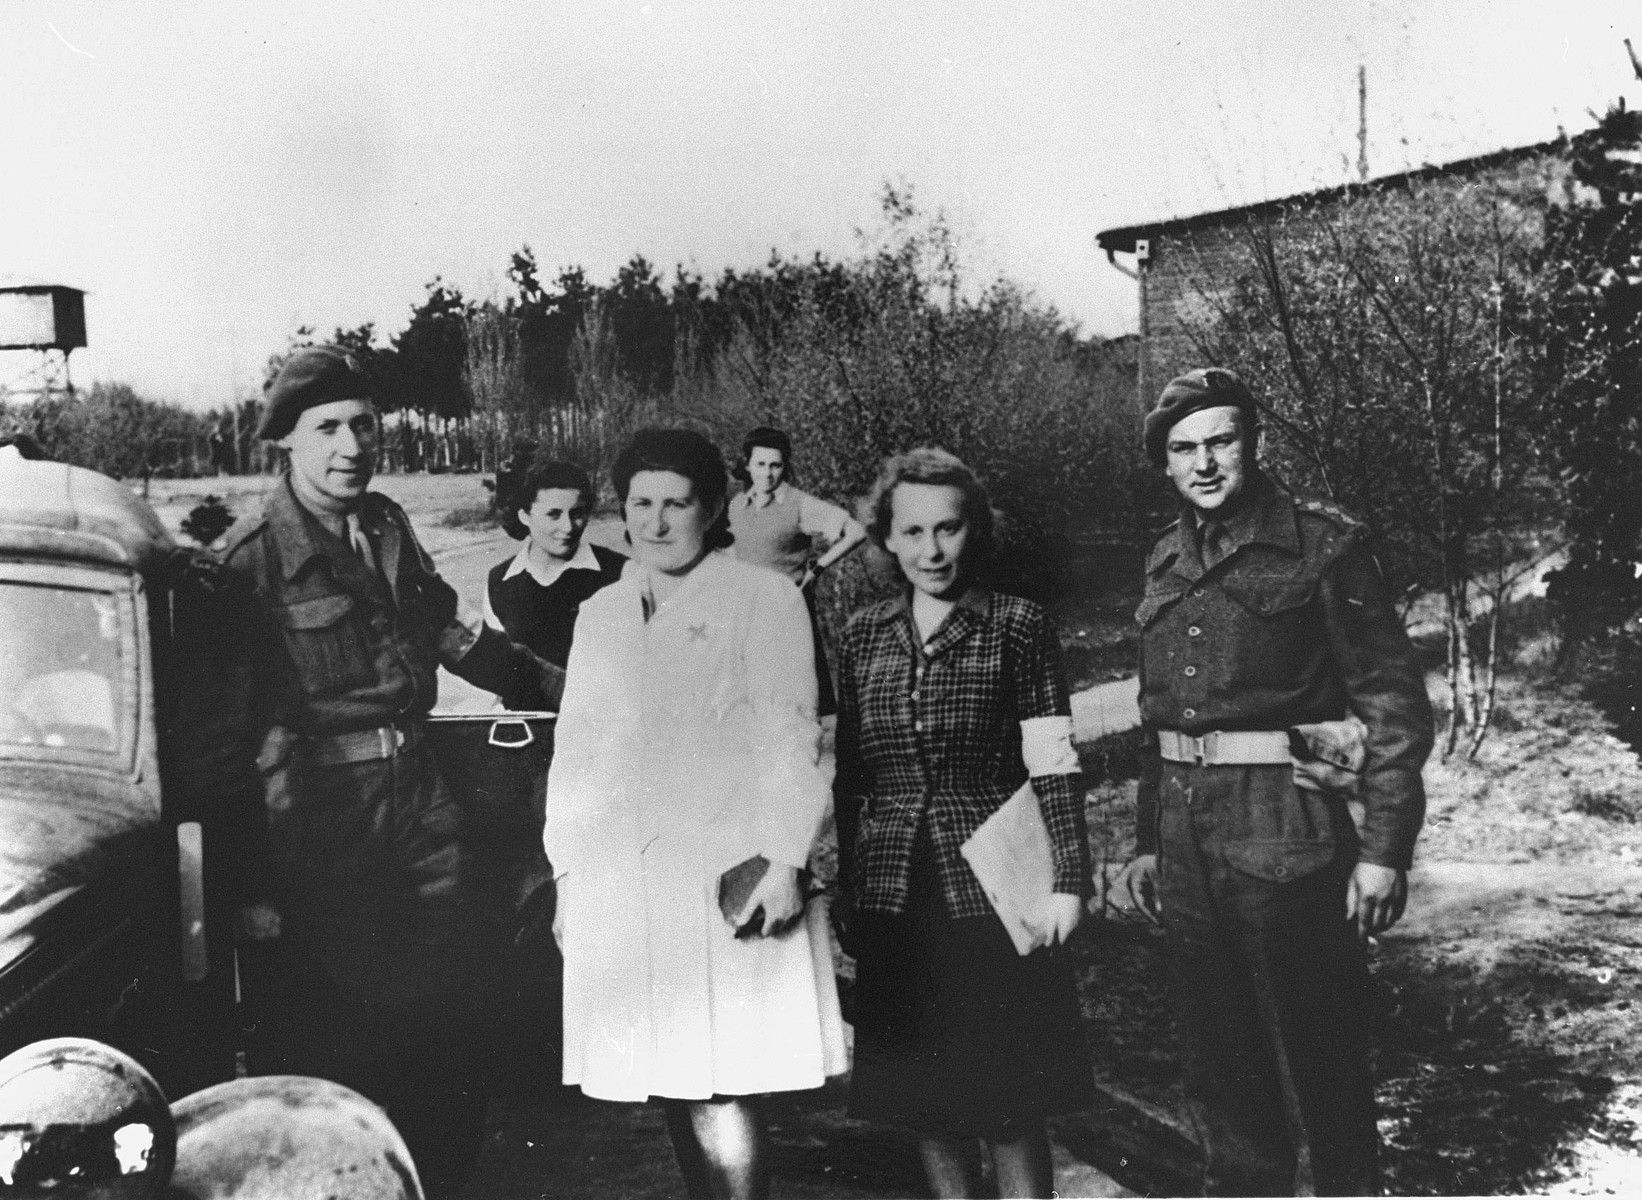 Survivors pose with British soldiers soon after the liberation of Bergen-Belsen.

Among those pictured is Hadassah Bimko (second from the left), Captain Winterbottom, and Dr. Ruth Gutman.